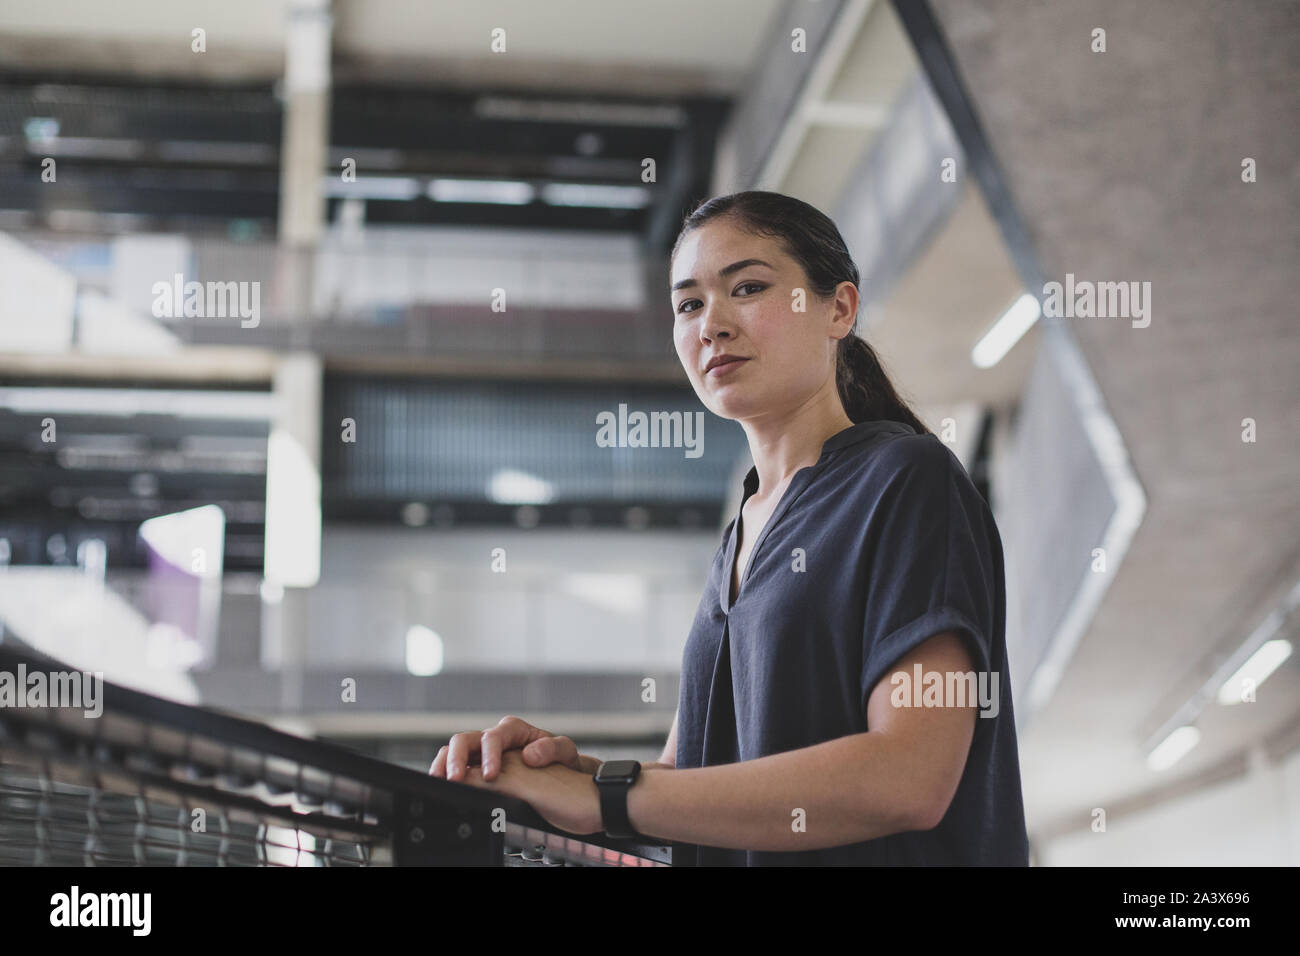 Portrait of female executive holding wearing a smartwatch Stock Photo